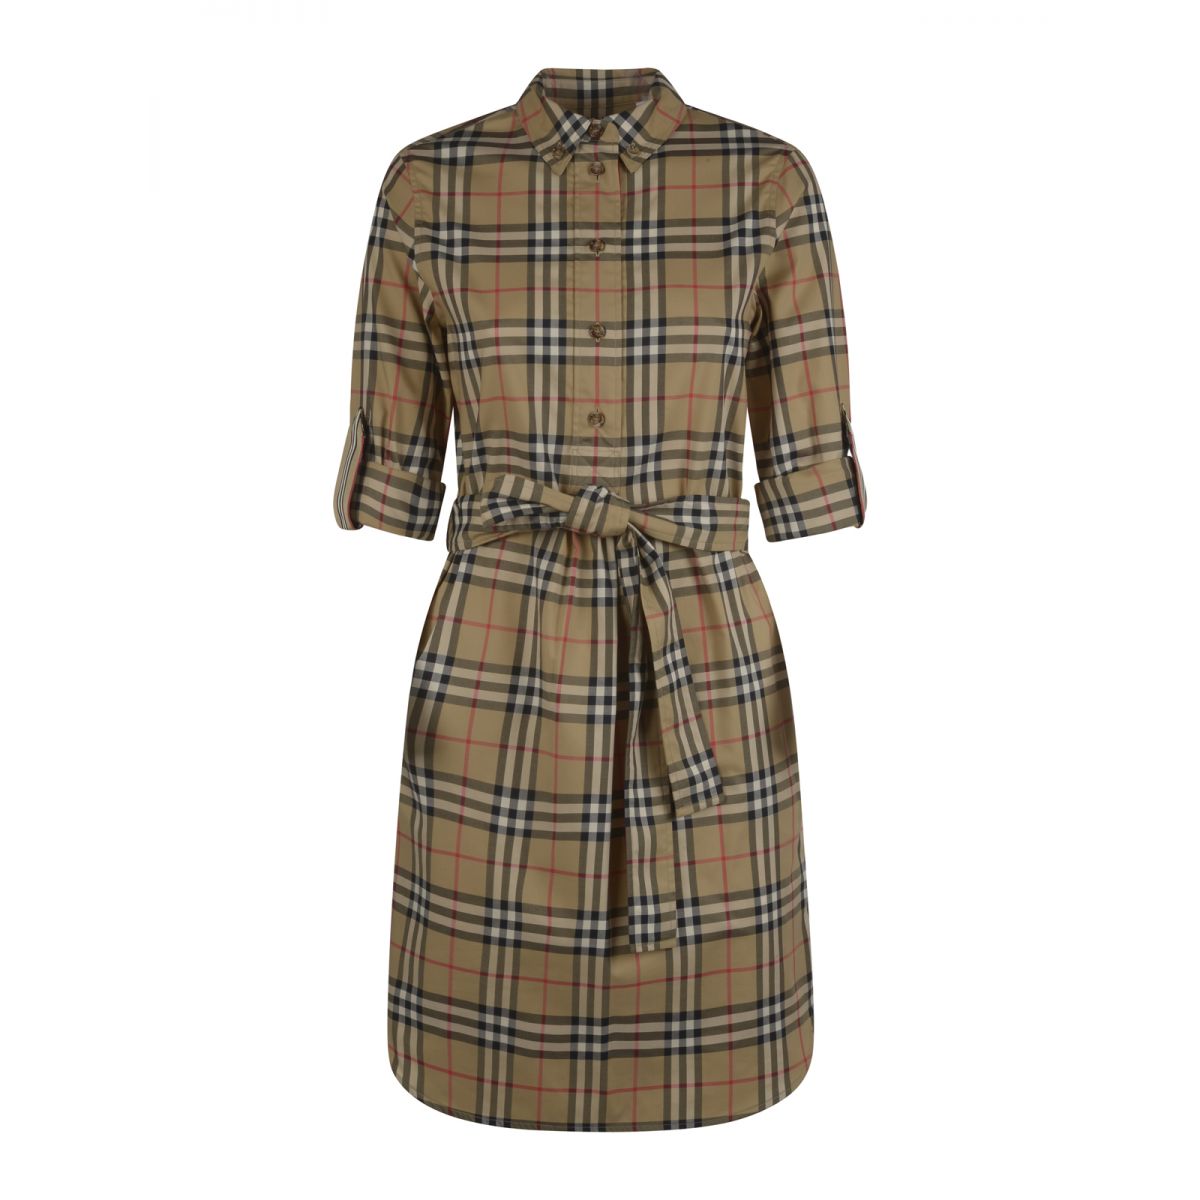 BURBERRY - Belted shirt dress in strech cotton Vintage Check